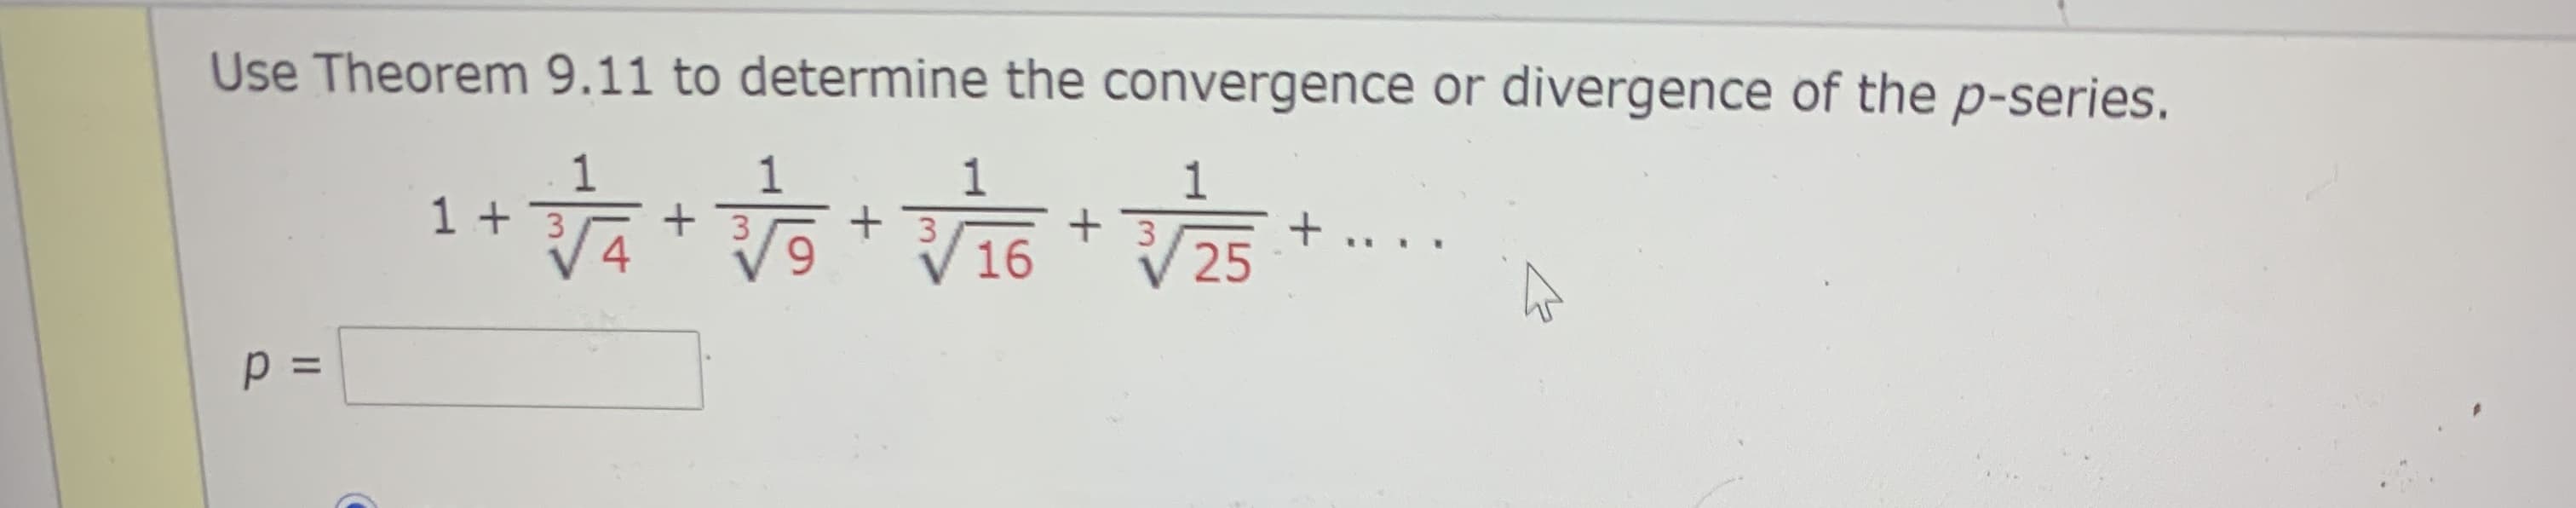 Use Theorem 9.11 to determine the convergence or divergence of the p-series.
1
1
1
+ 3
16
1 + 3
+ 3
4
....
